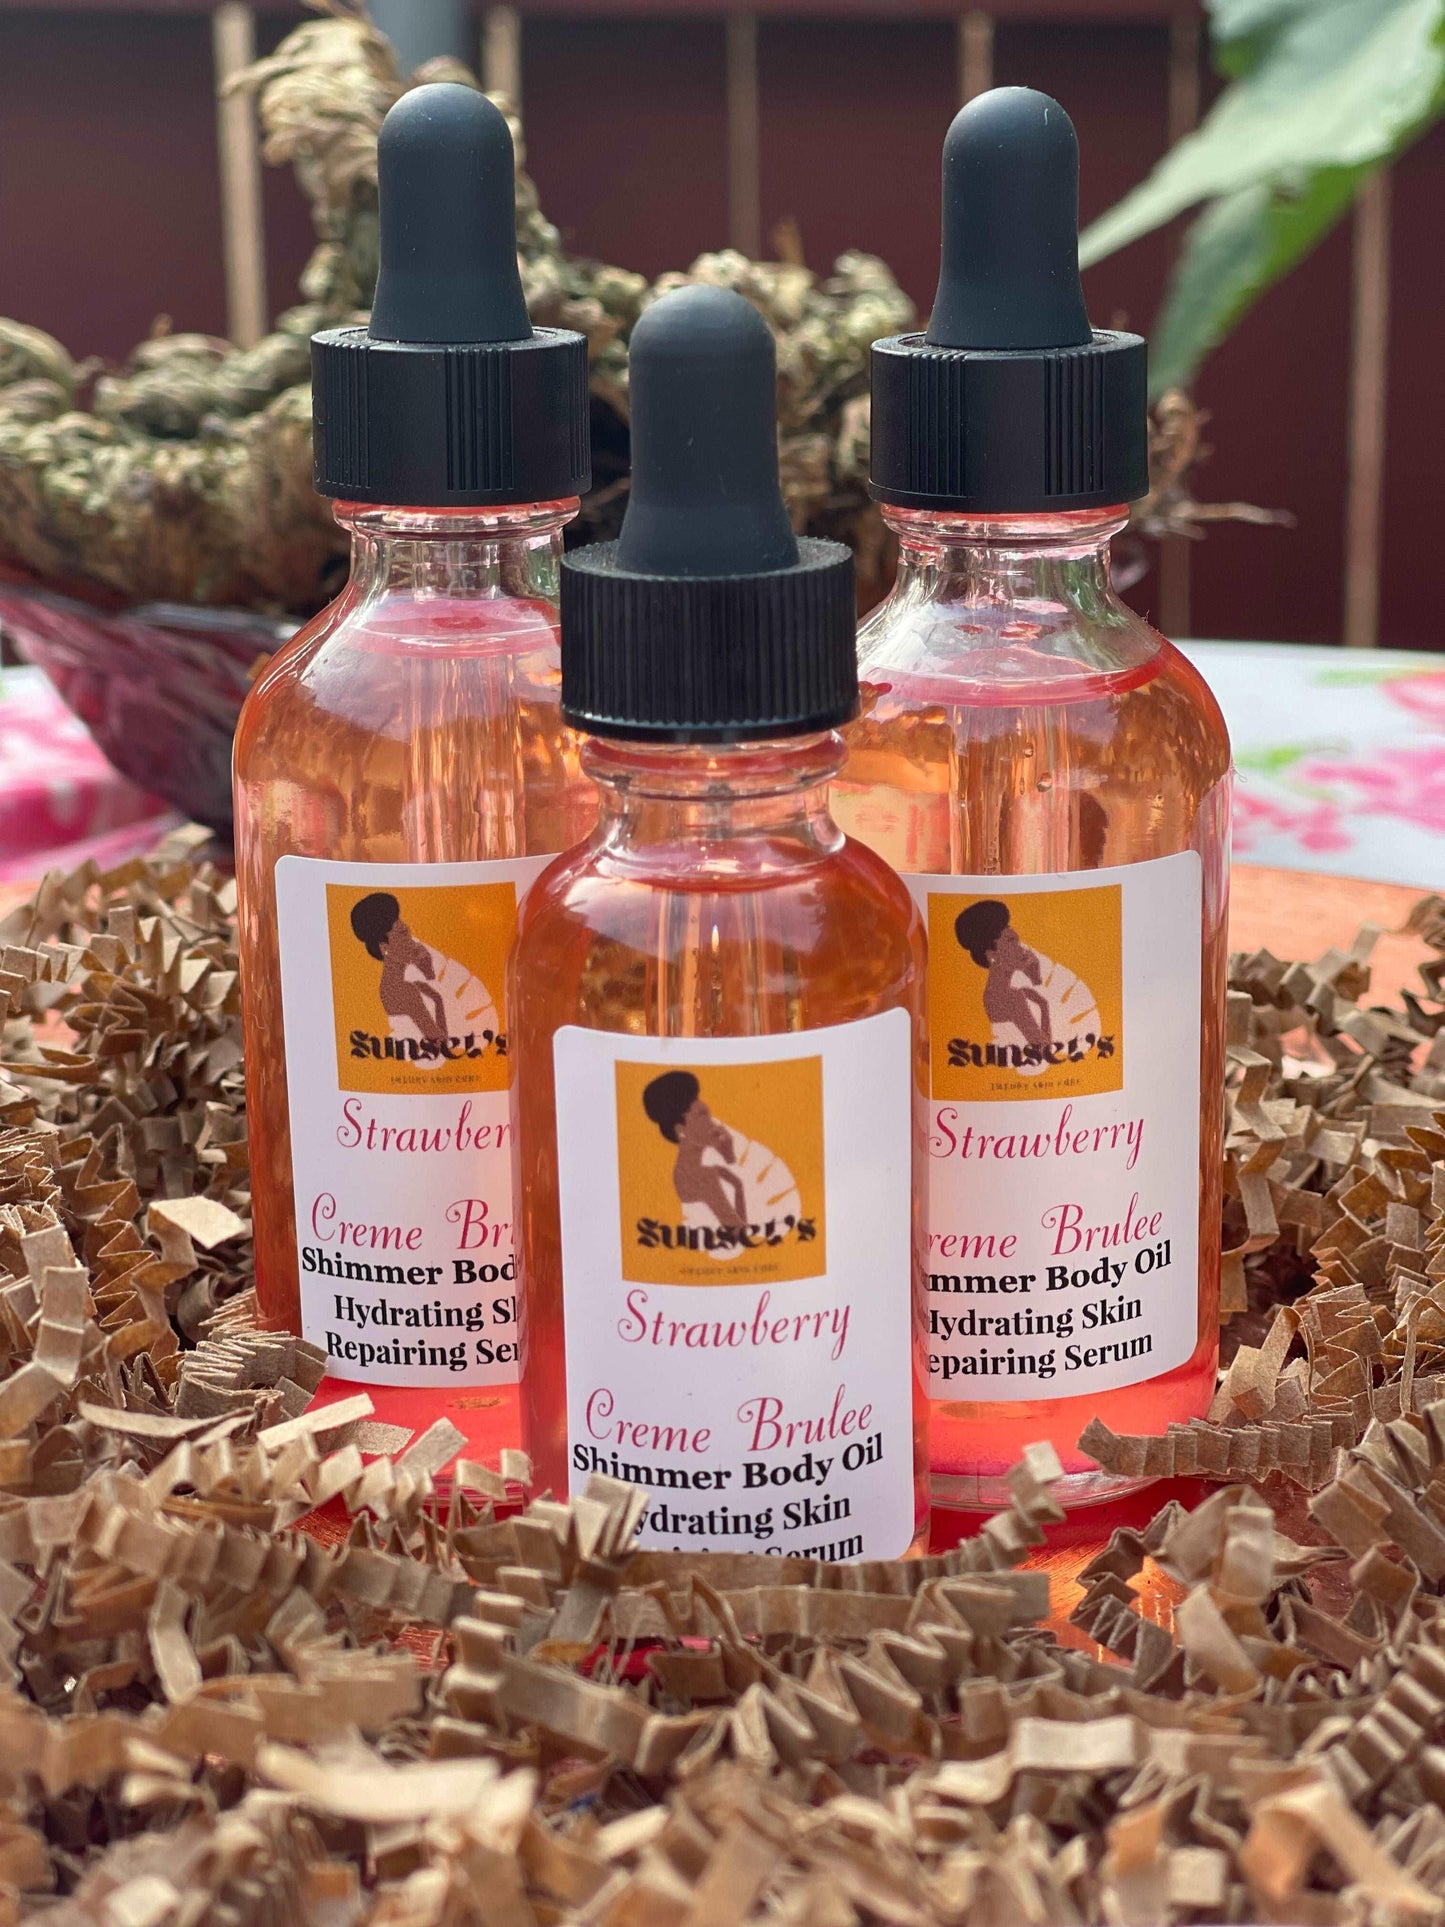 Strawberry Creme Brulee Shimmer Body Oil by Sage N Thangs